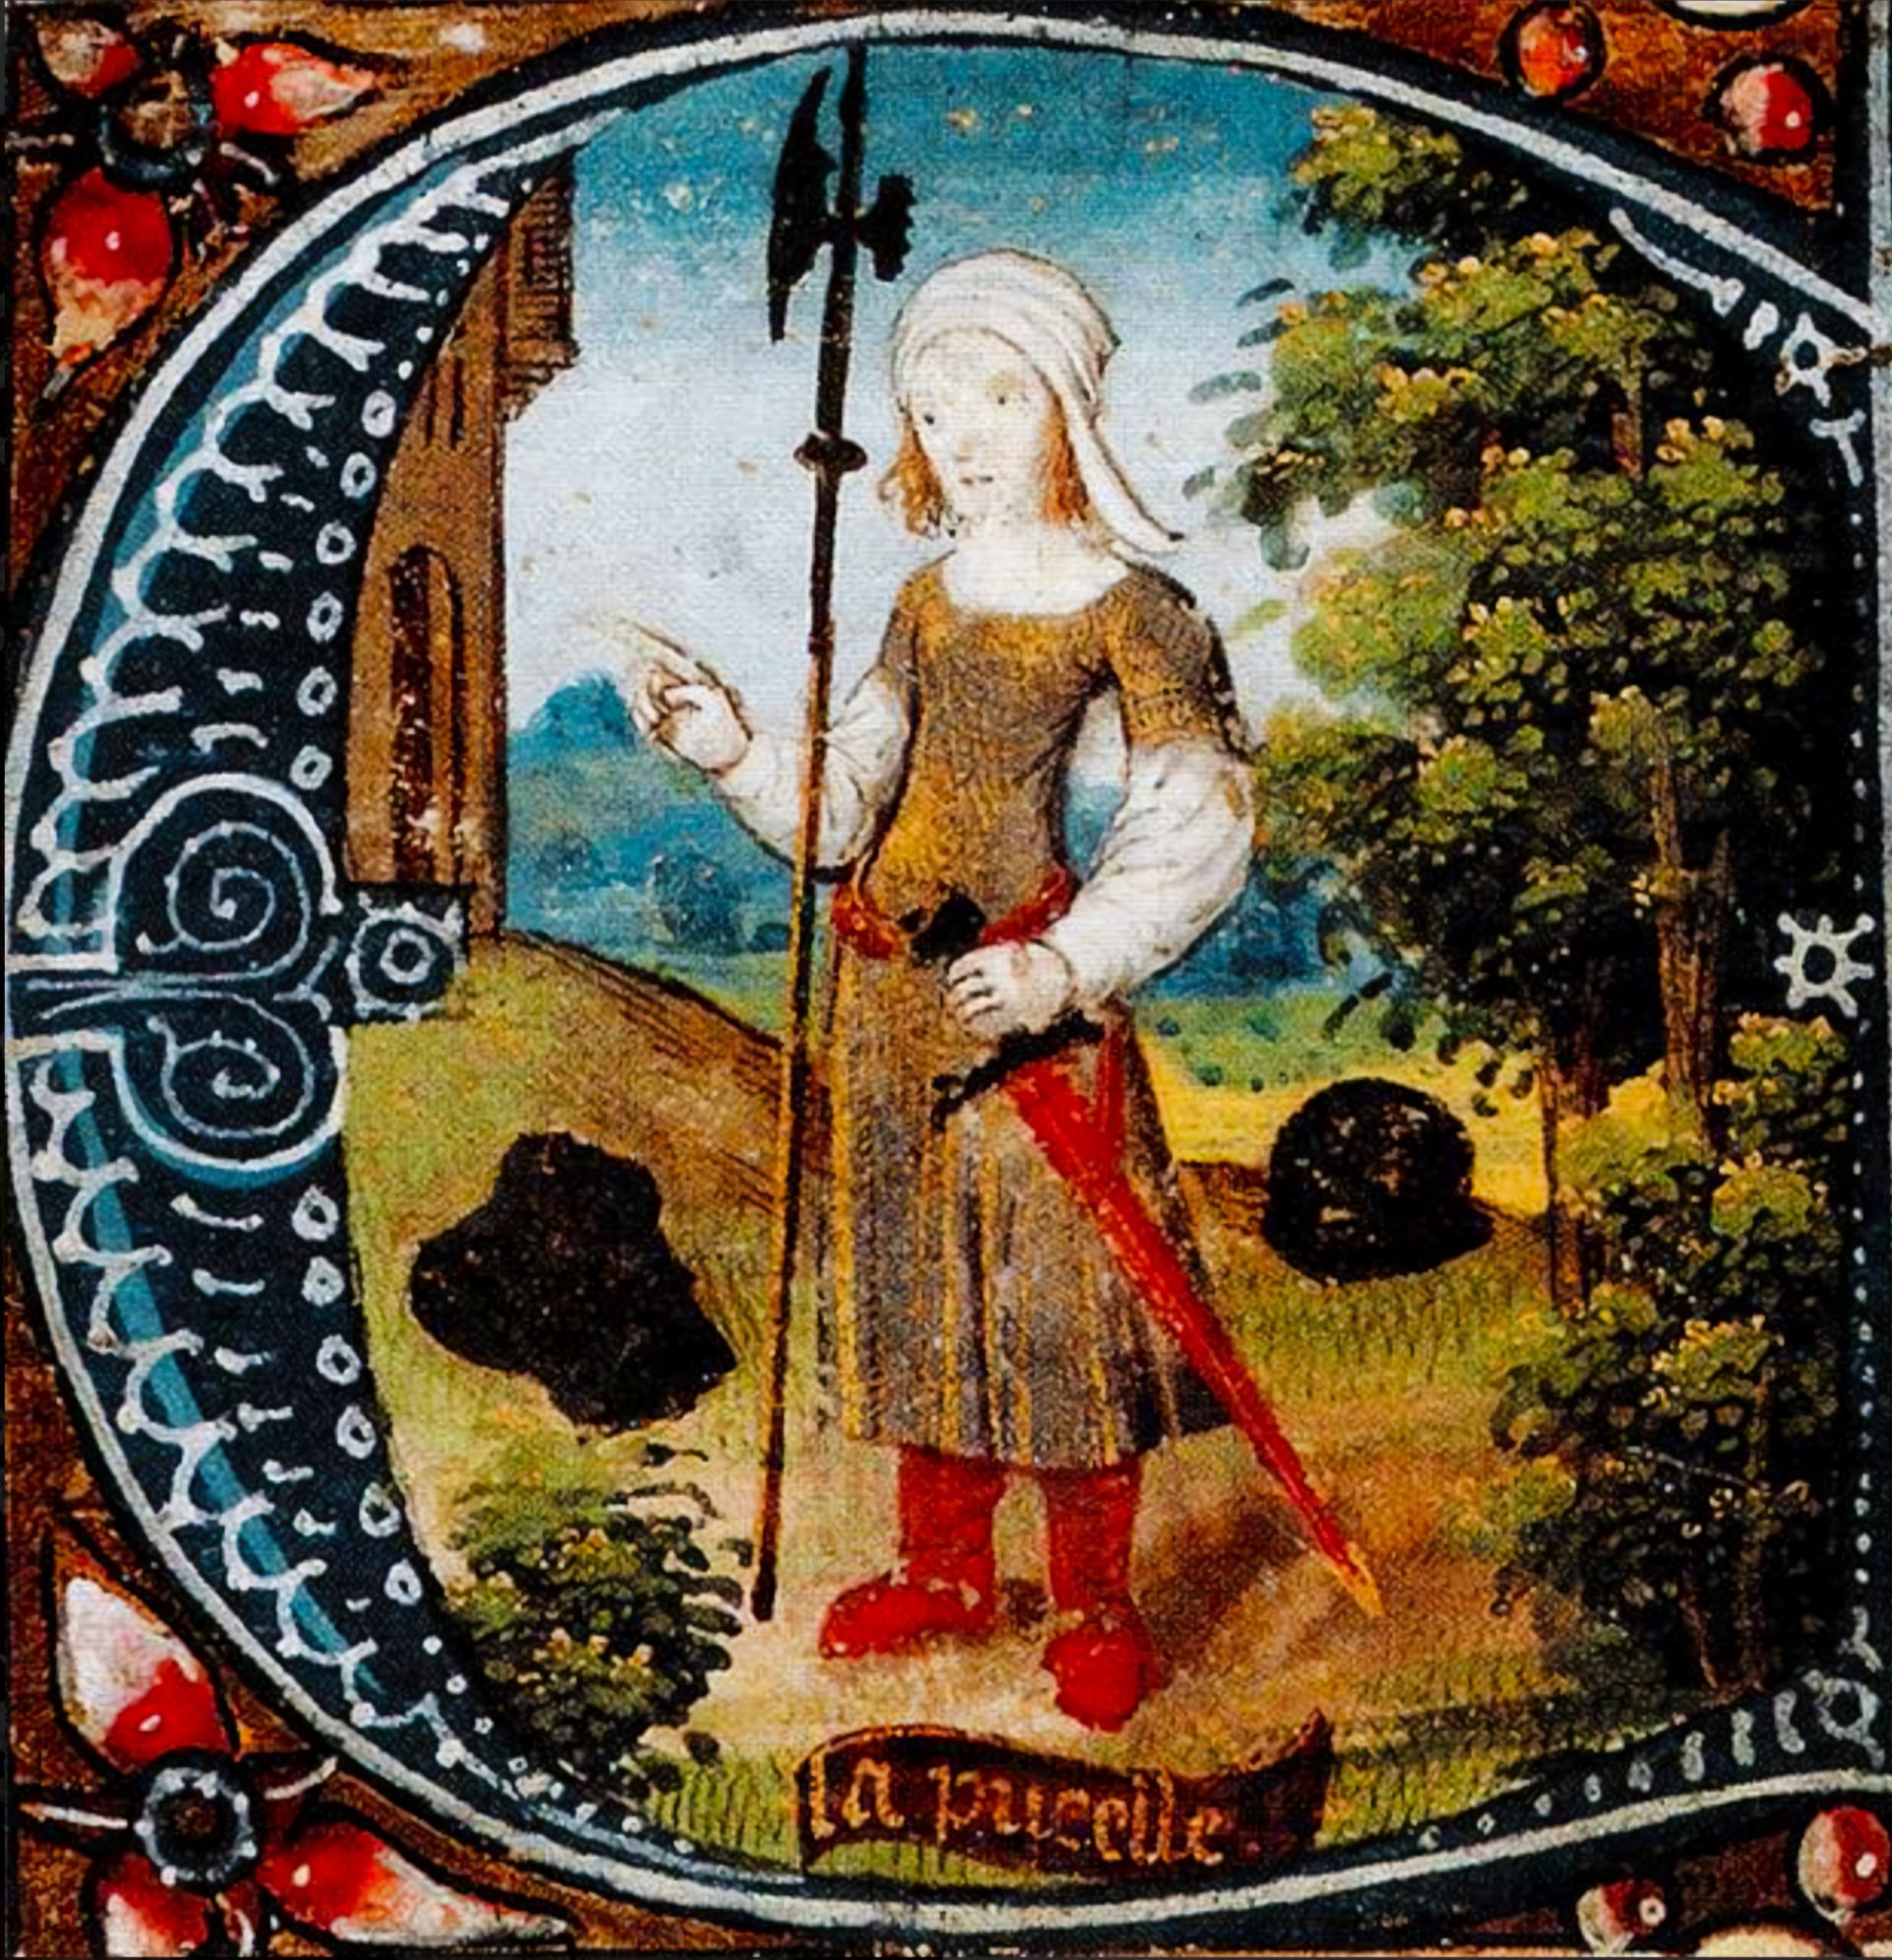 A medieval painting of Joan of Arc in peasant attire, holding her weapons.The frame is decorated with flowers and patterns. The text “La Pucelle” is written at the bottom of the frame.